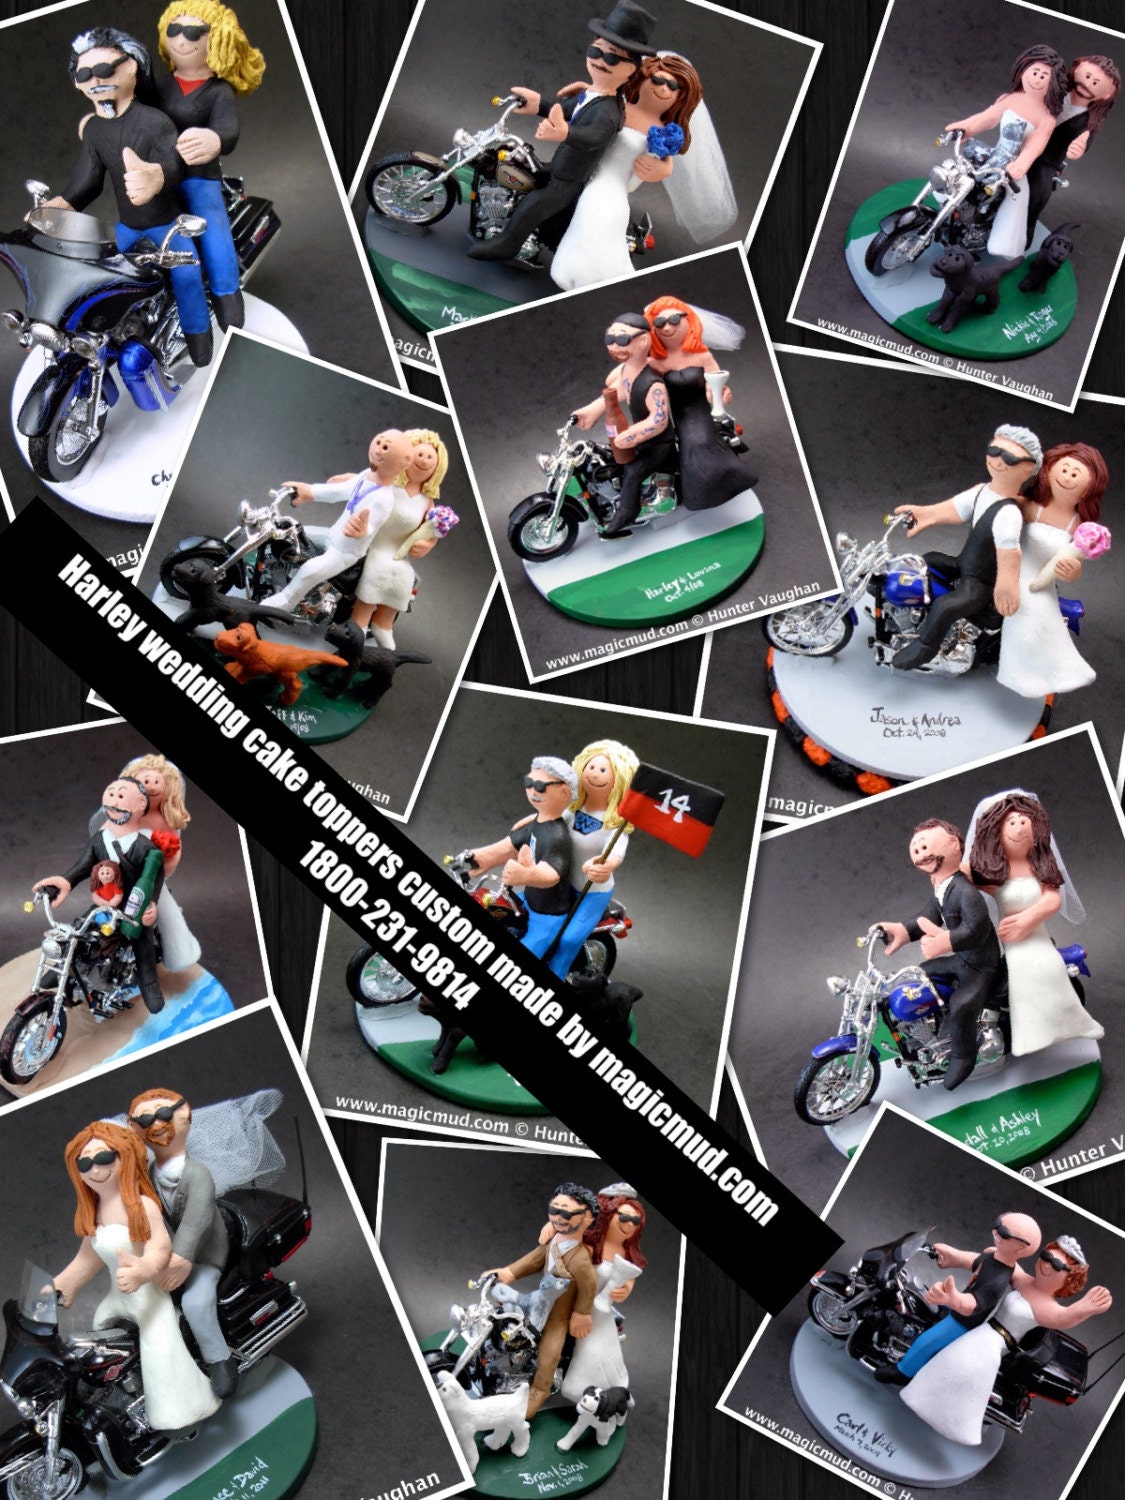 Bride and Groom on Motorcycles Wedding Cake Topper